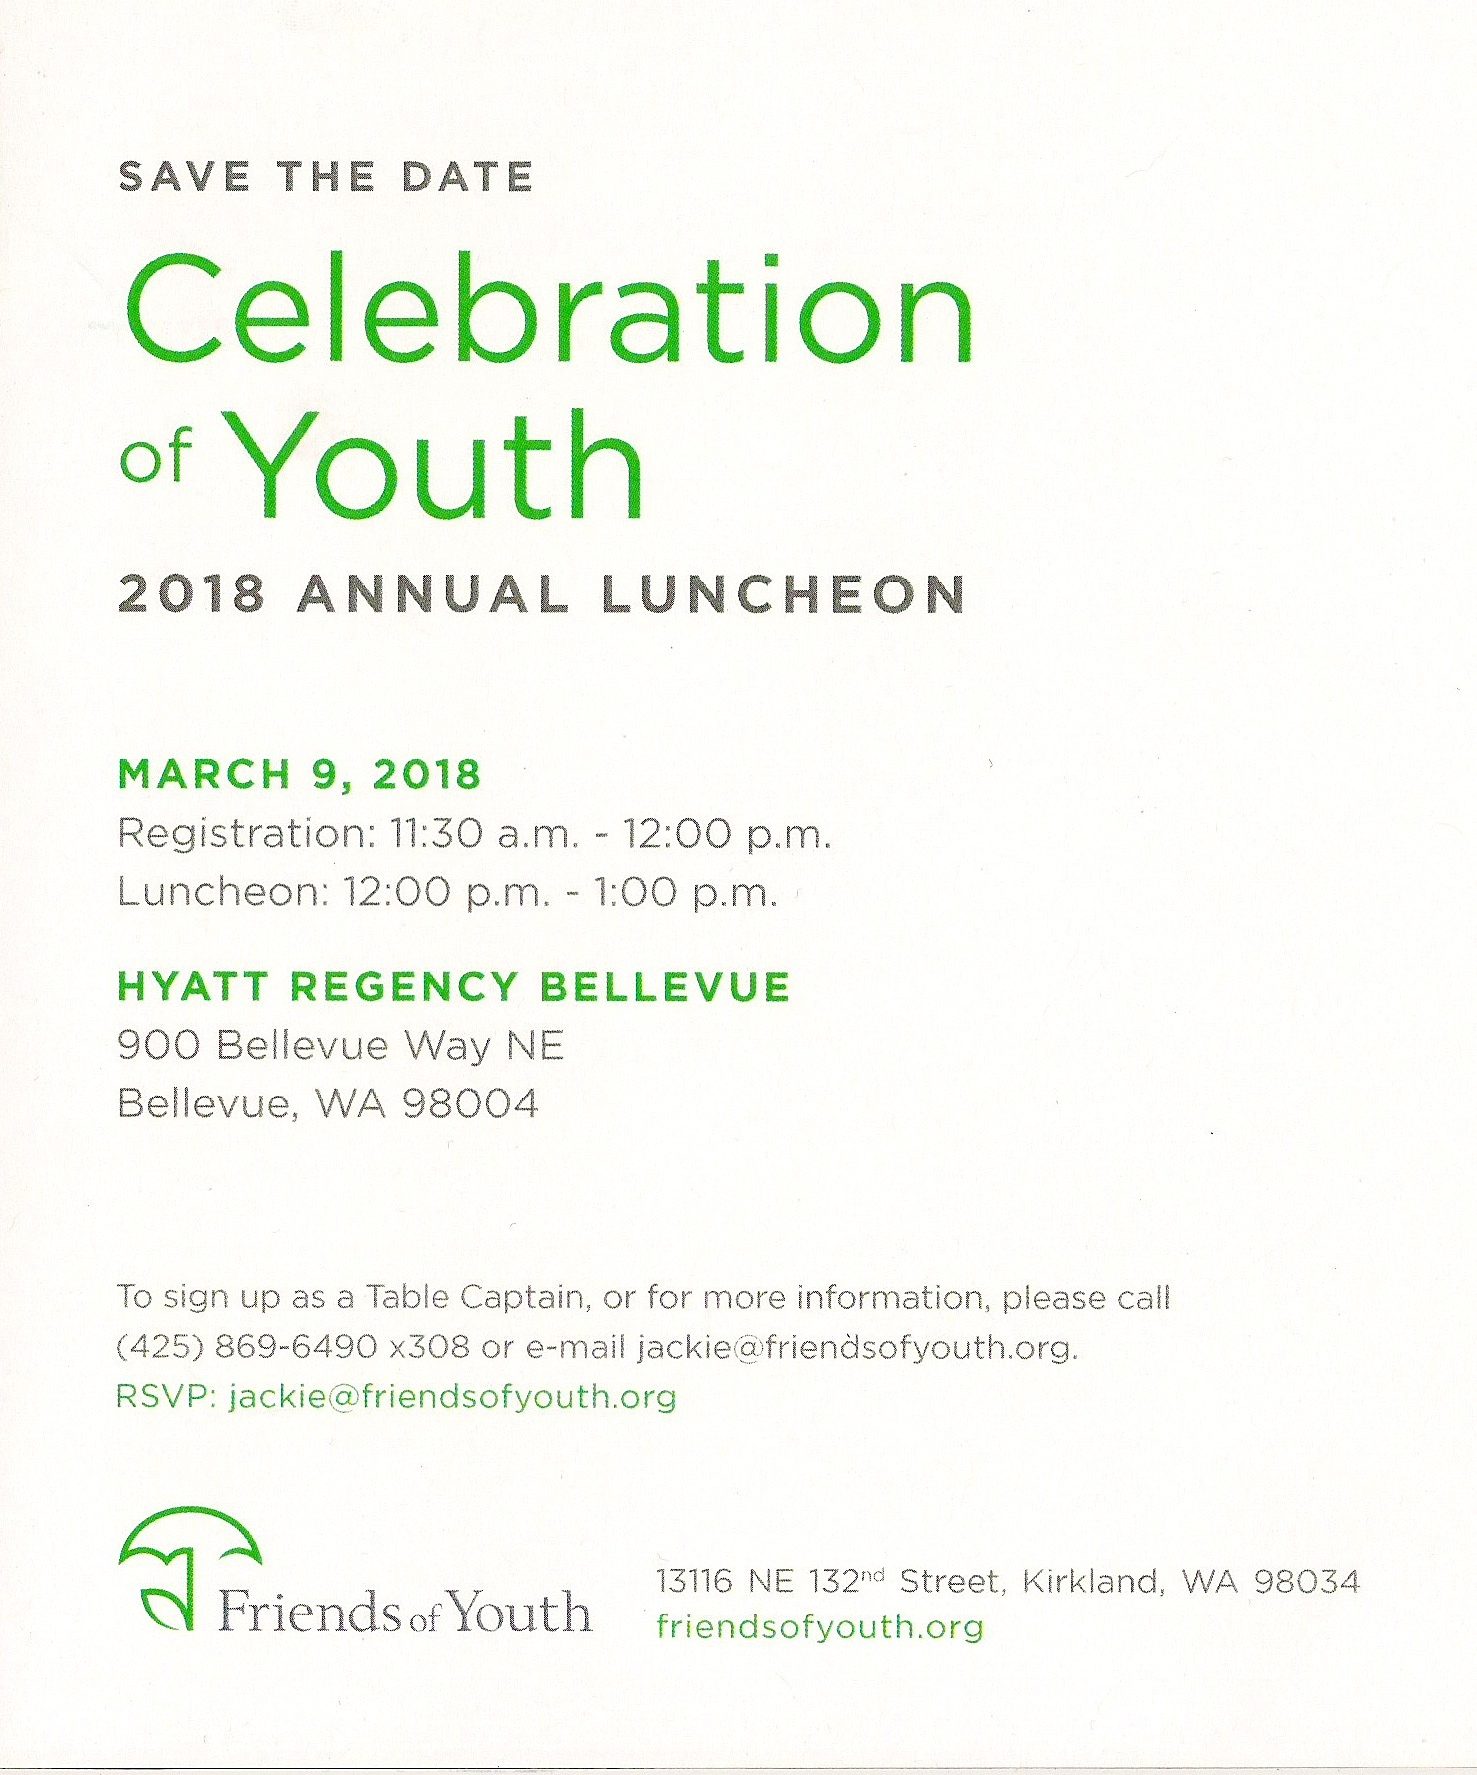 Celebration of Youth 2018 Annual Luncheon